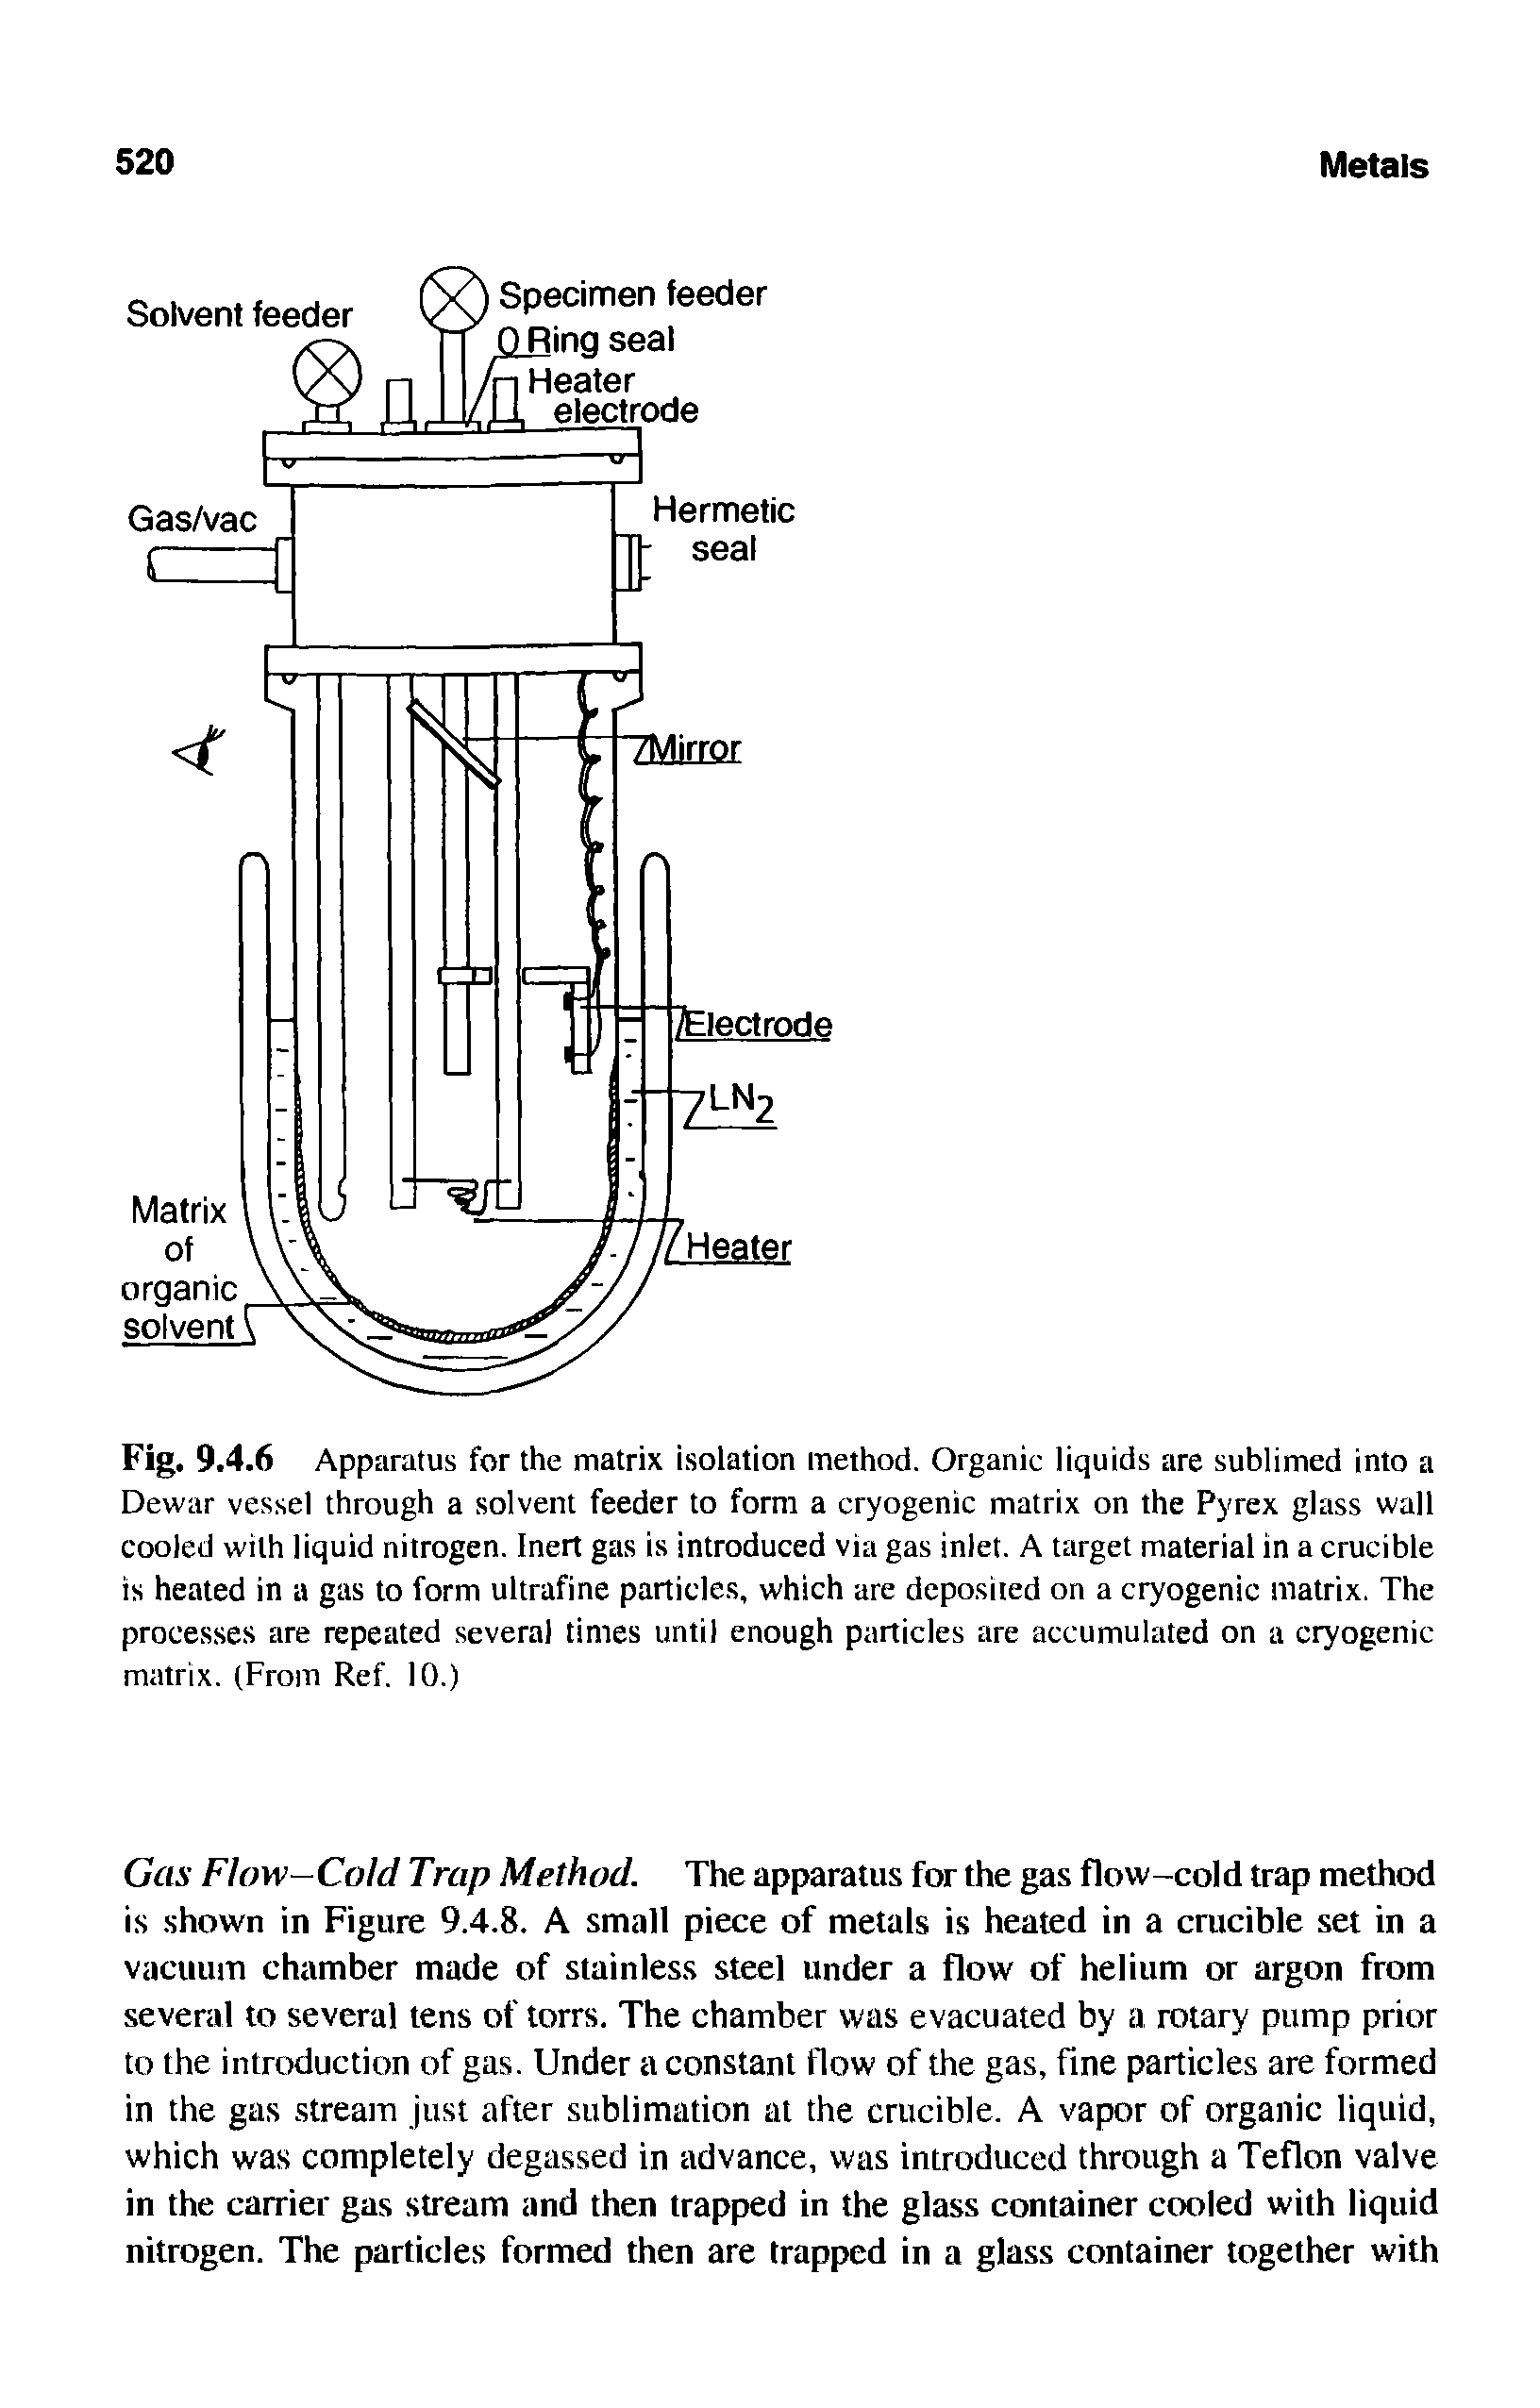 Fig. 9.4.6 Apparatus for the matrix isolation method. Organic liquids are sublimed into a Dewar vessel through a solvent feeder to form a cryogenic matrix on the Pyrex glass wall cooled with liquid nitrogen. Inert gas is introduced via gas inlet. A target material in a crucible is heated in a gas to form ultrafine particles, which are deposited on a cryogenic matrix. The processes are repeated several times until enough particles are accumulated on a cryogenic matrix. (From Ref. 10.)...